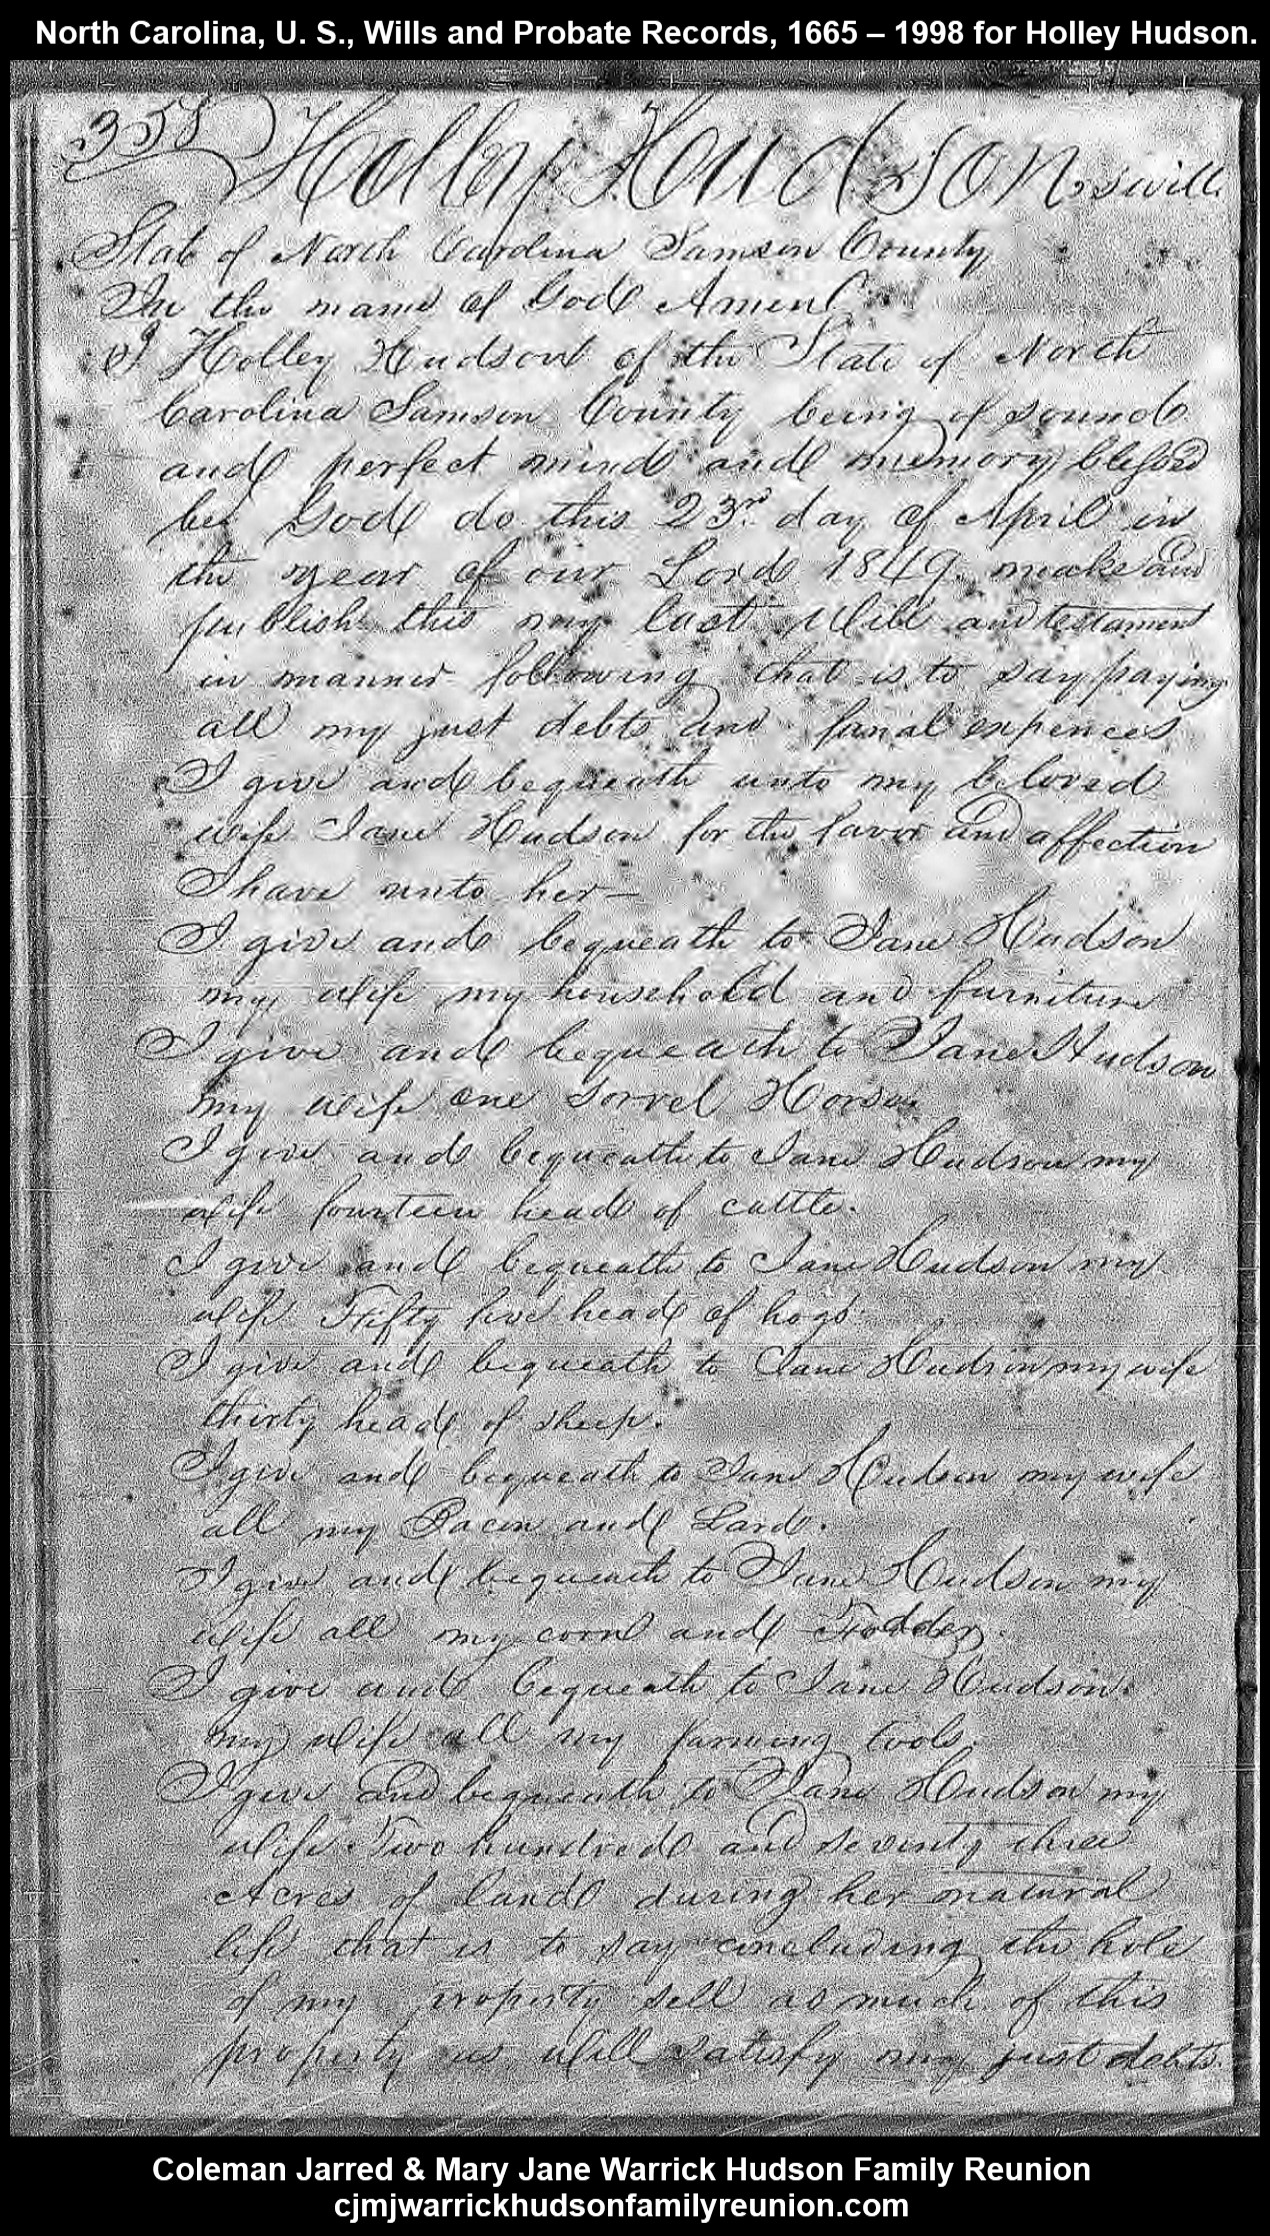 1849, 4-23 -  Holley Hudson's Will (Father of CJ) - (Page 1 of 2)